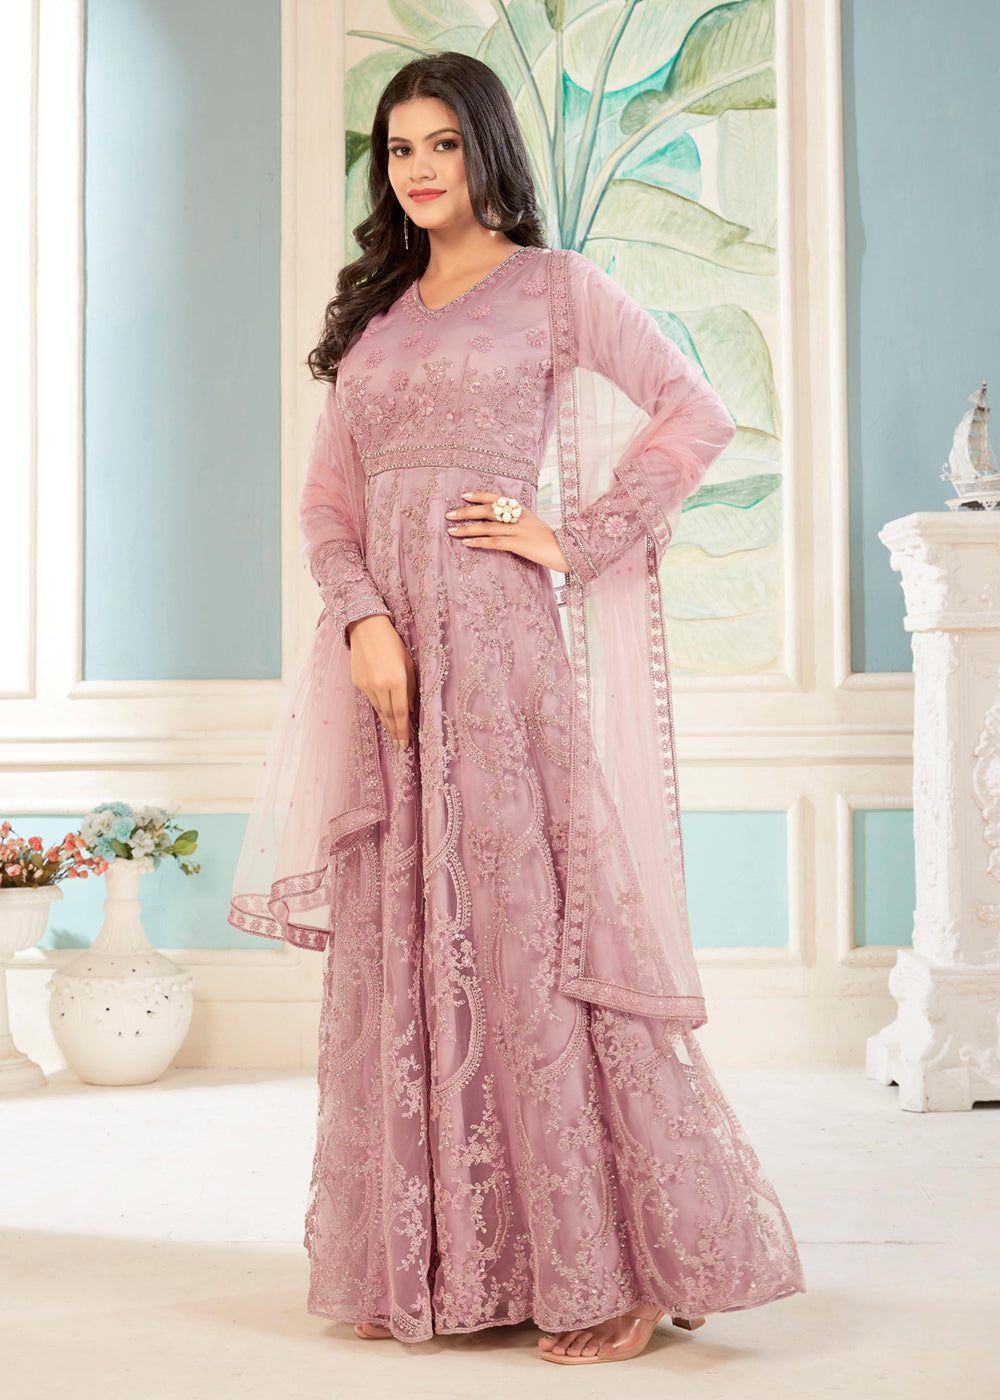 Buy Now Charming Pink Floral Embroidered Wedding Wear Anarkali Suit Online in USA, UK, Australia, New Zealand, Canada & Worldwide at Empress Clothing.